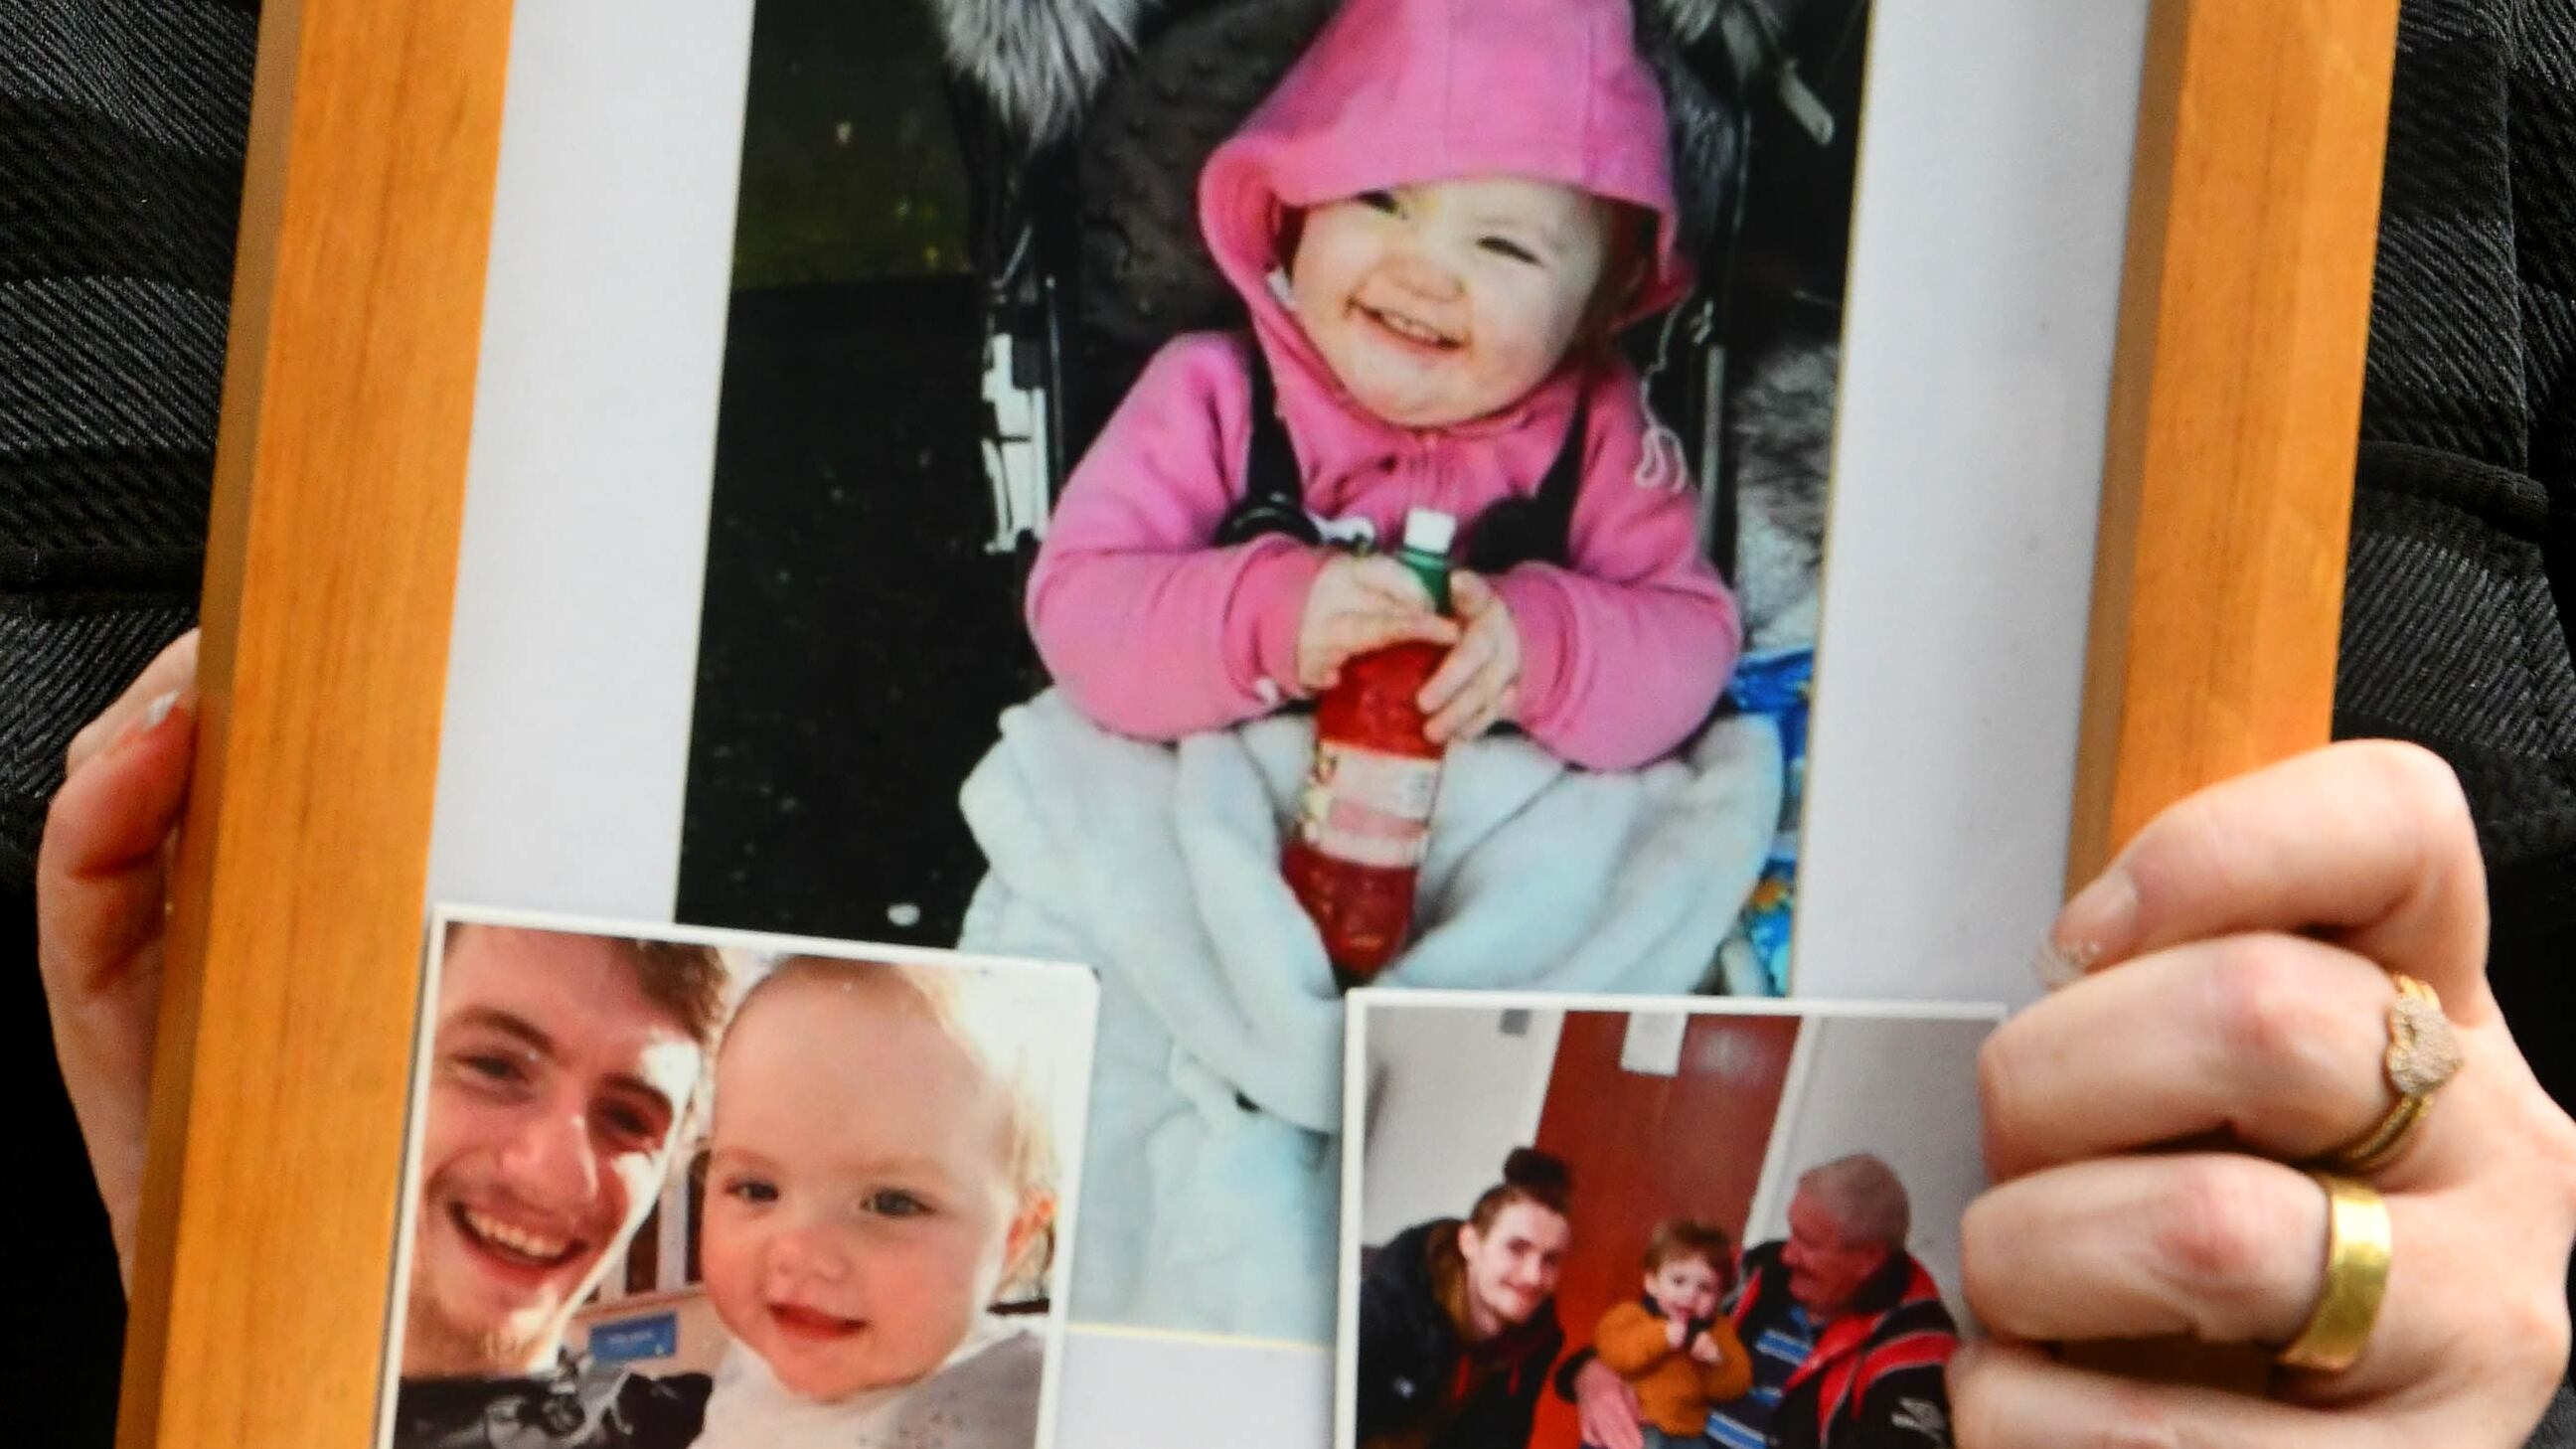 Alan Lewis - PhotopressBelfast.co.uk.     21-5-2024
Murdered baby Ali Jayden Doyle’s aunt Cathleen outside Belfast Crown Court after seeing the baby girl’s killer plead guilty today, (Tuesday 21st).  
Court Copy by Ashleigh McDonald via AM News
Mobile :  07968 698207